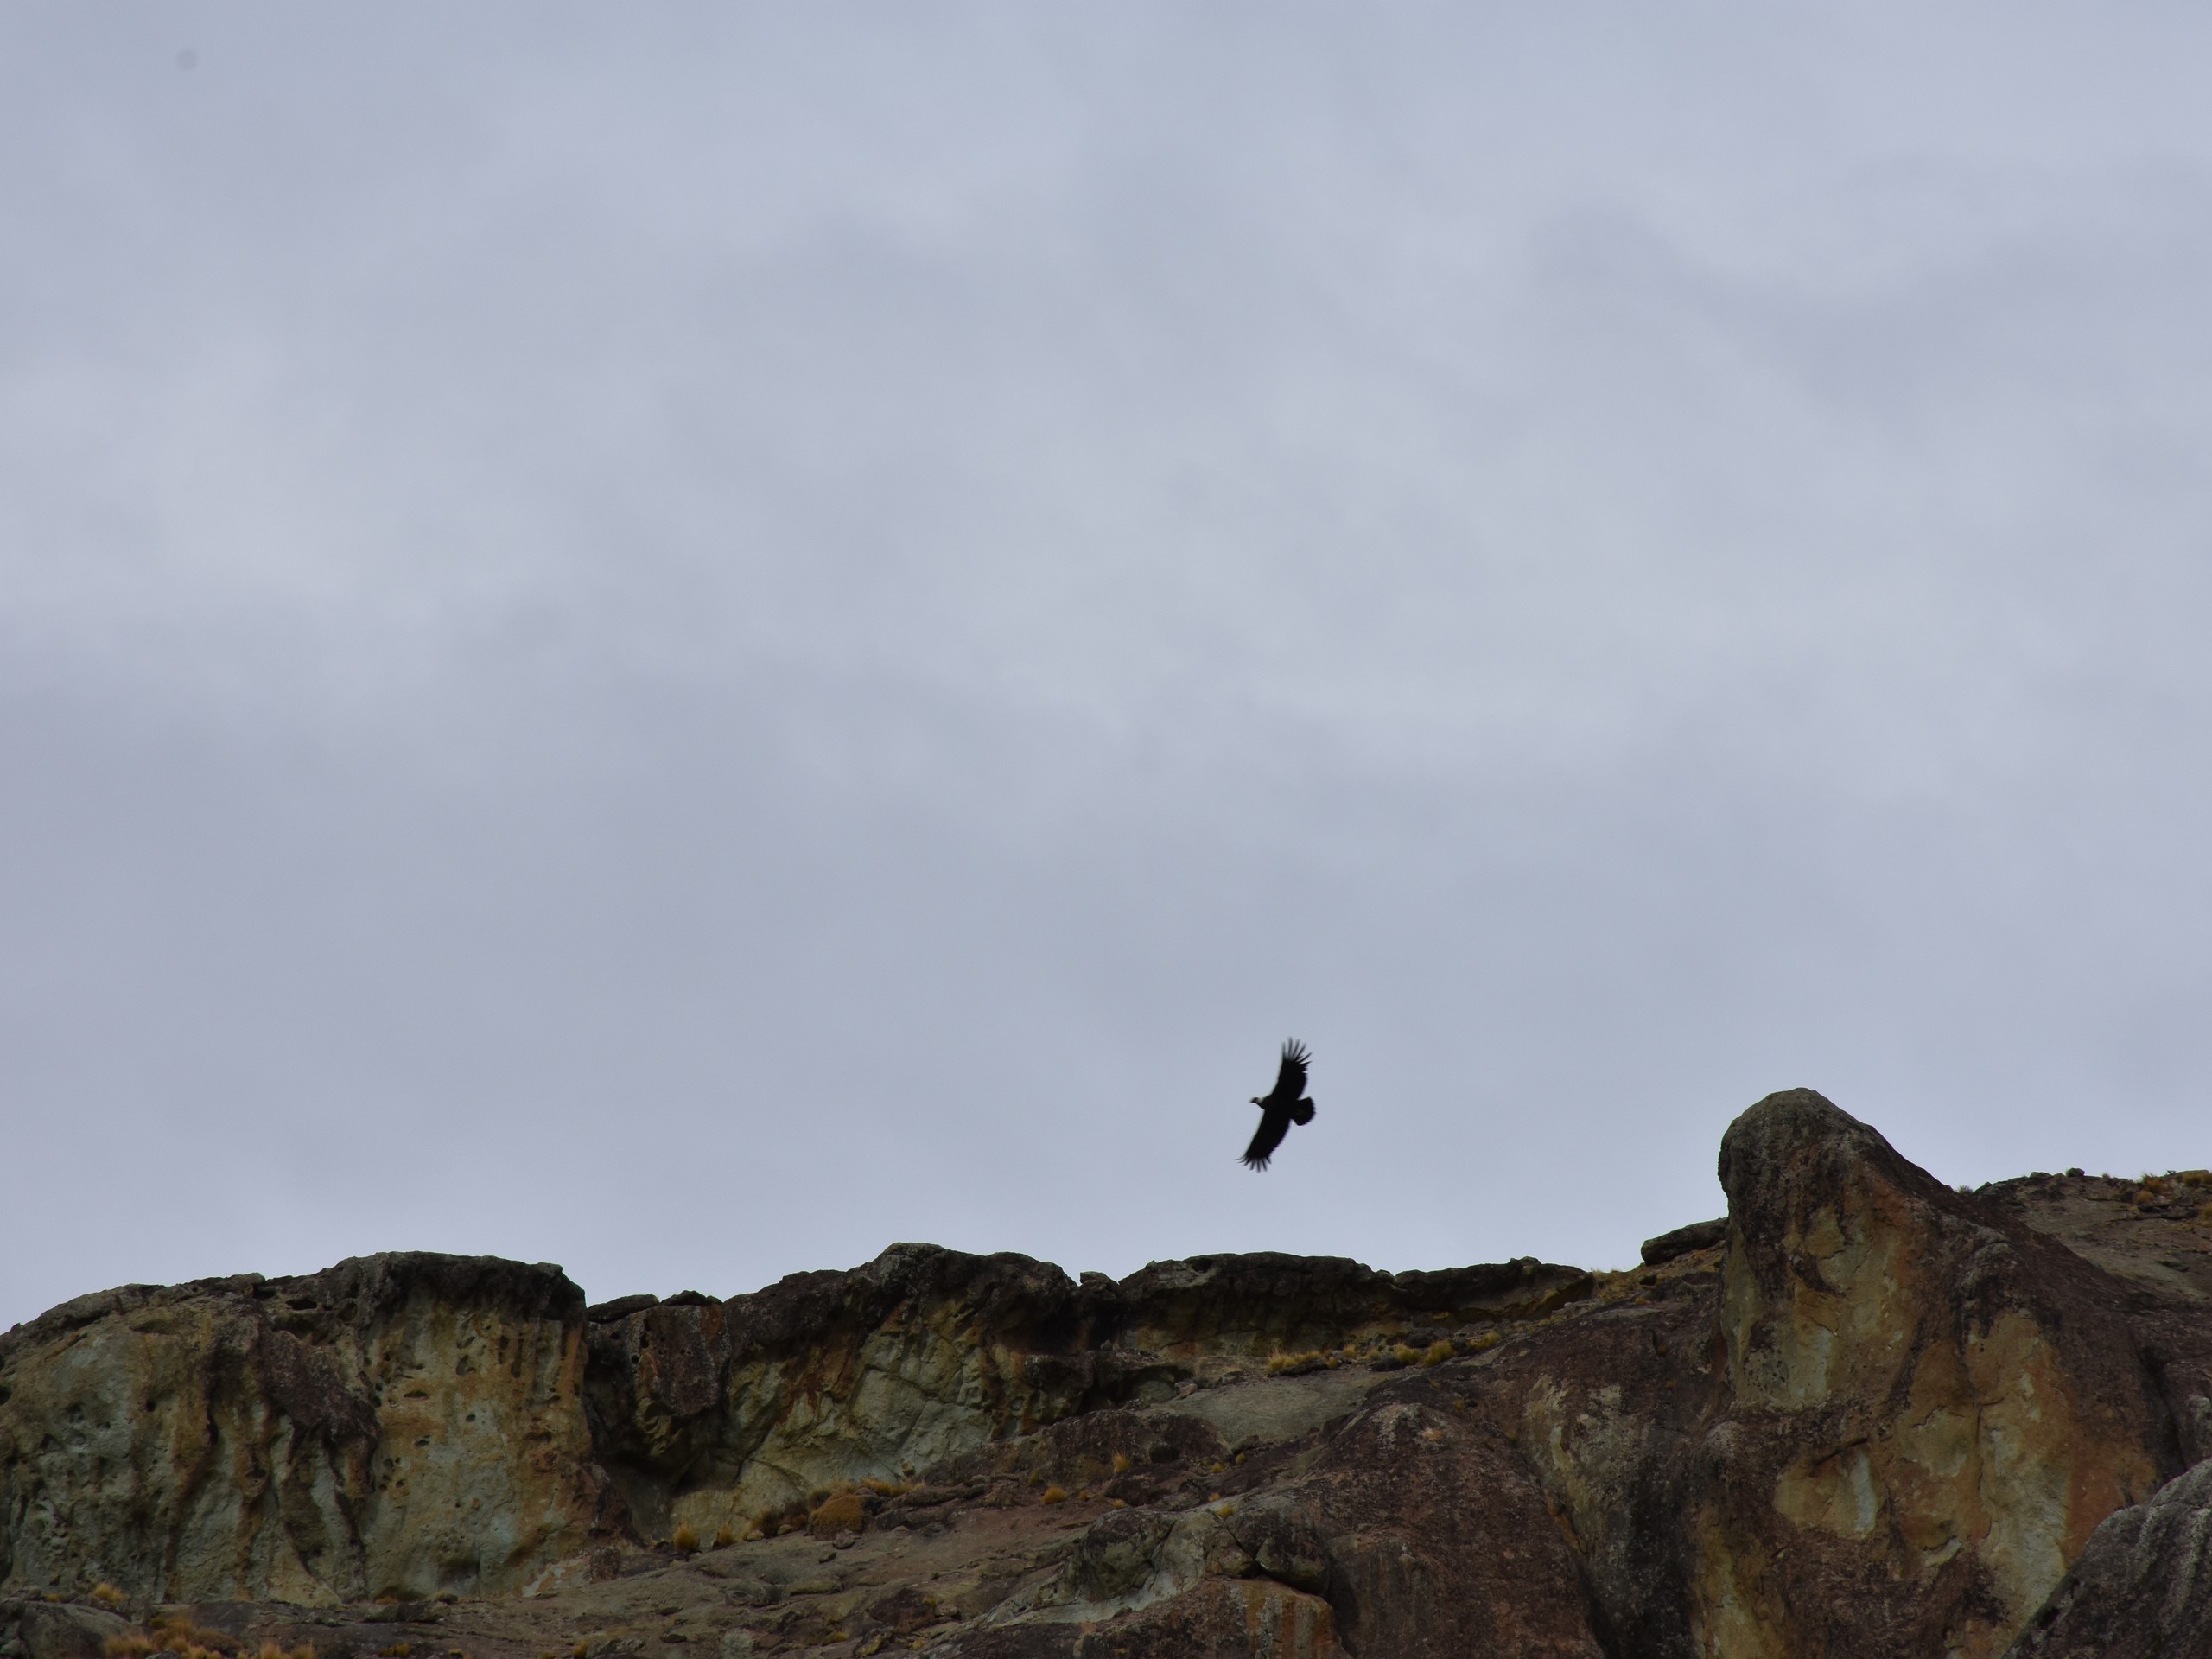 Andean Condor in Chile, seen on self-drive tour in Chile